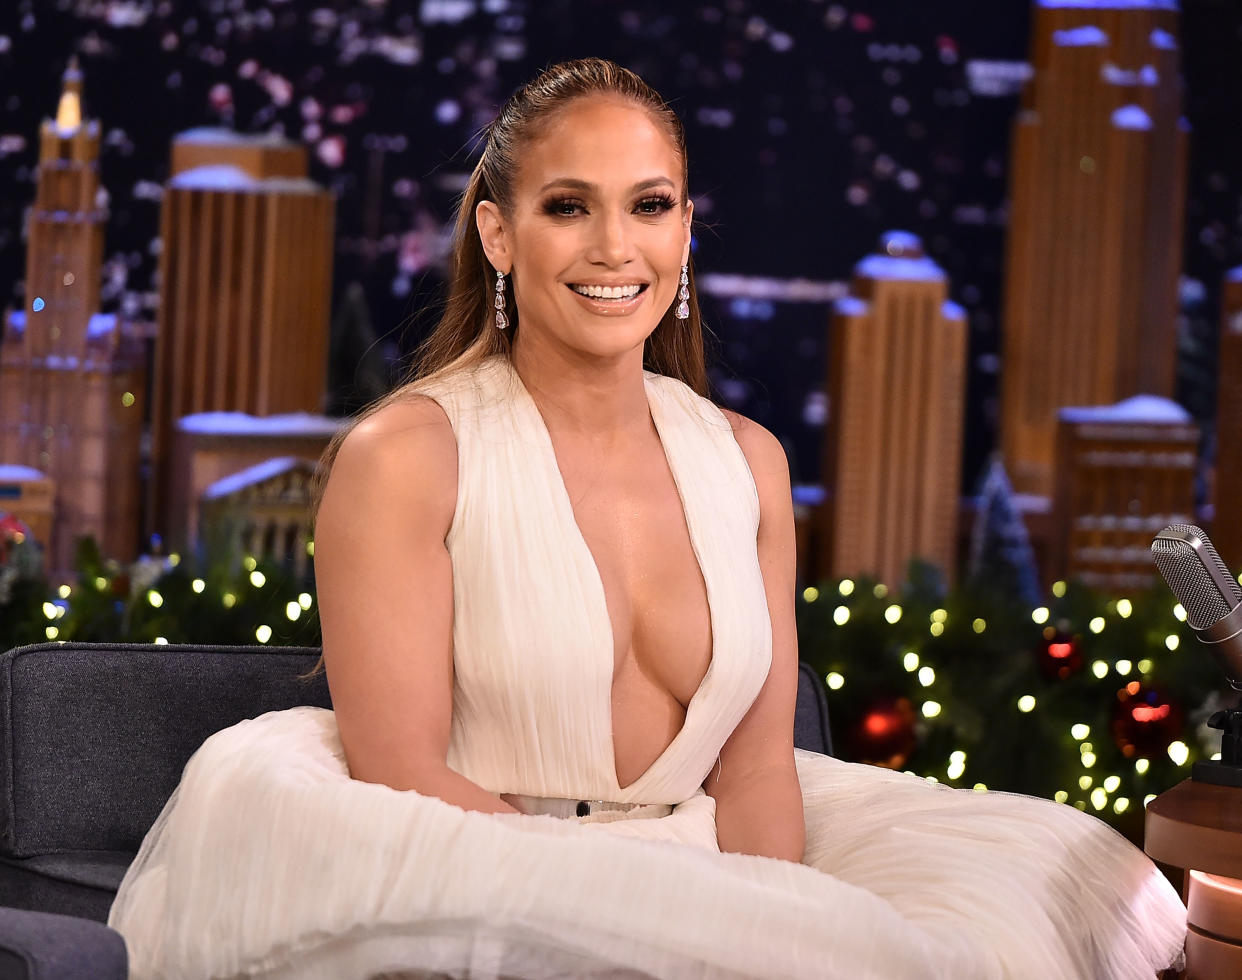 Jennifer Lopez Visits ‘The Tonight Show Starring Jimmy Fallon’ on December 11, 2018 in New York City. (Photo: Theo Wargo/Getty Images for NBC)